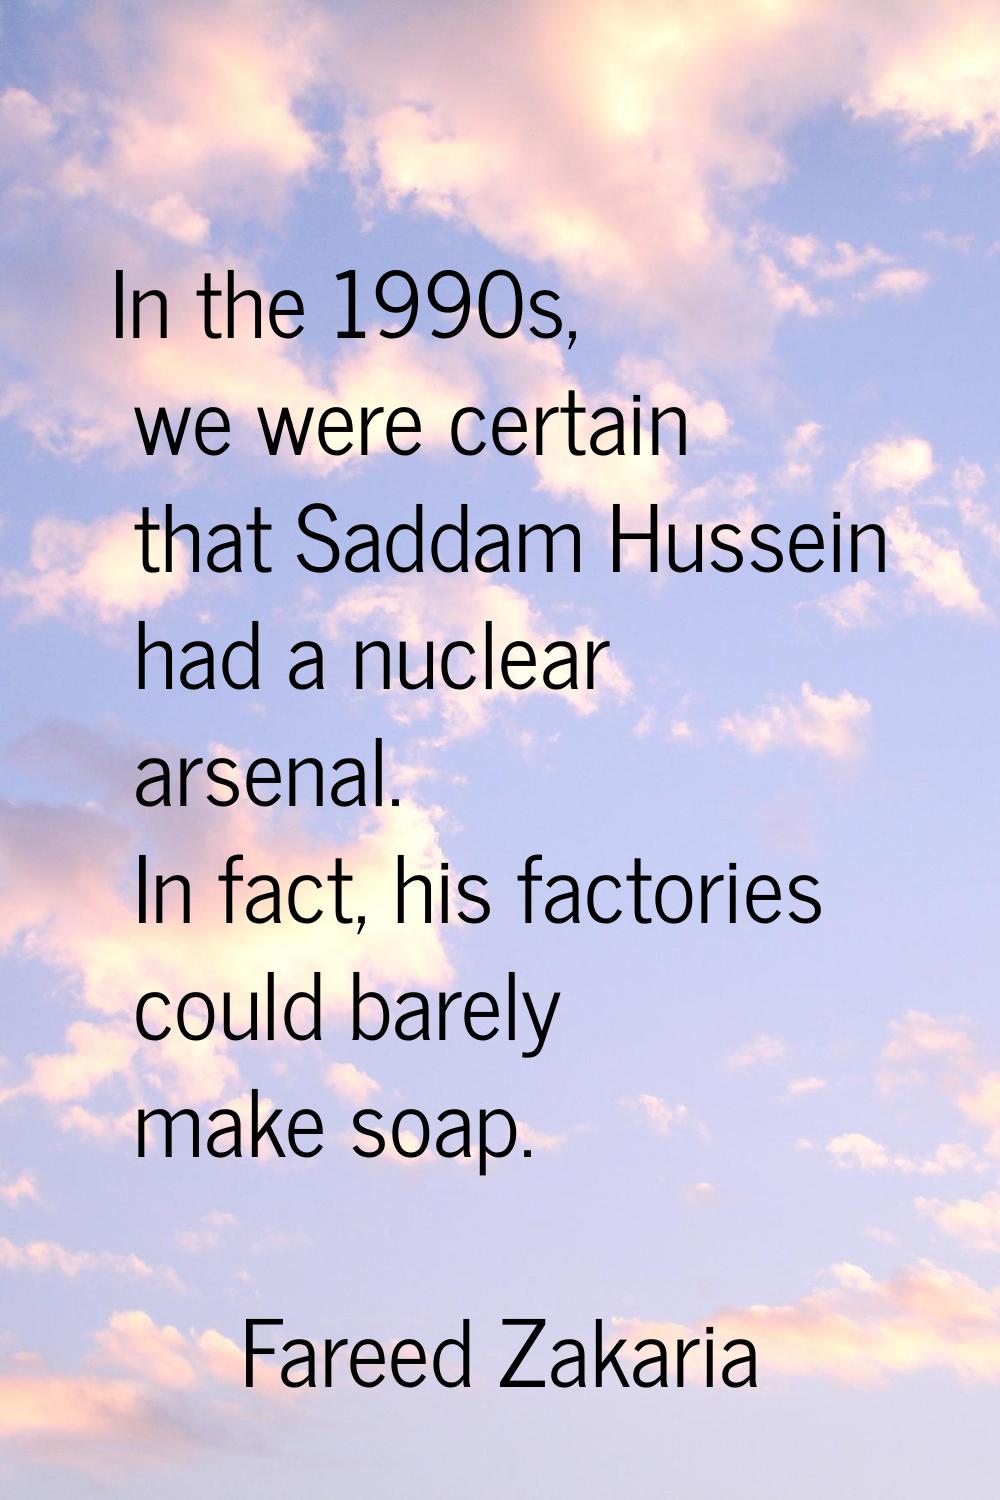 In the 1990s, we were certain that Saddam Hussein had a nuclear arsenal. In fact, his factories cou